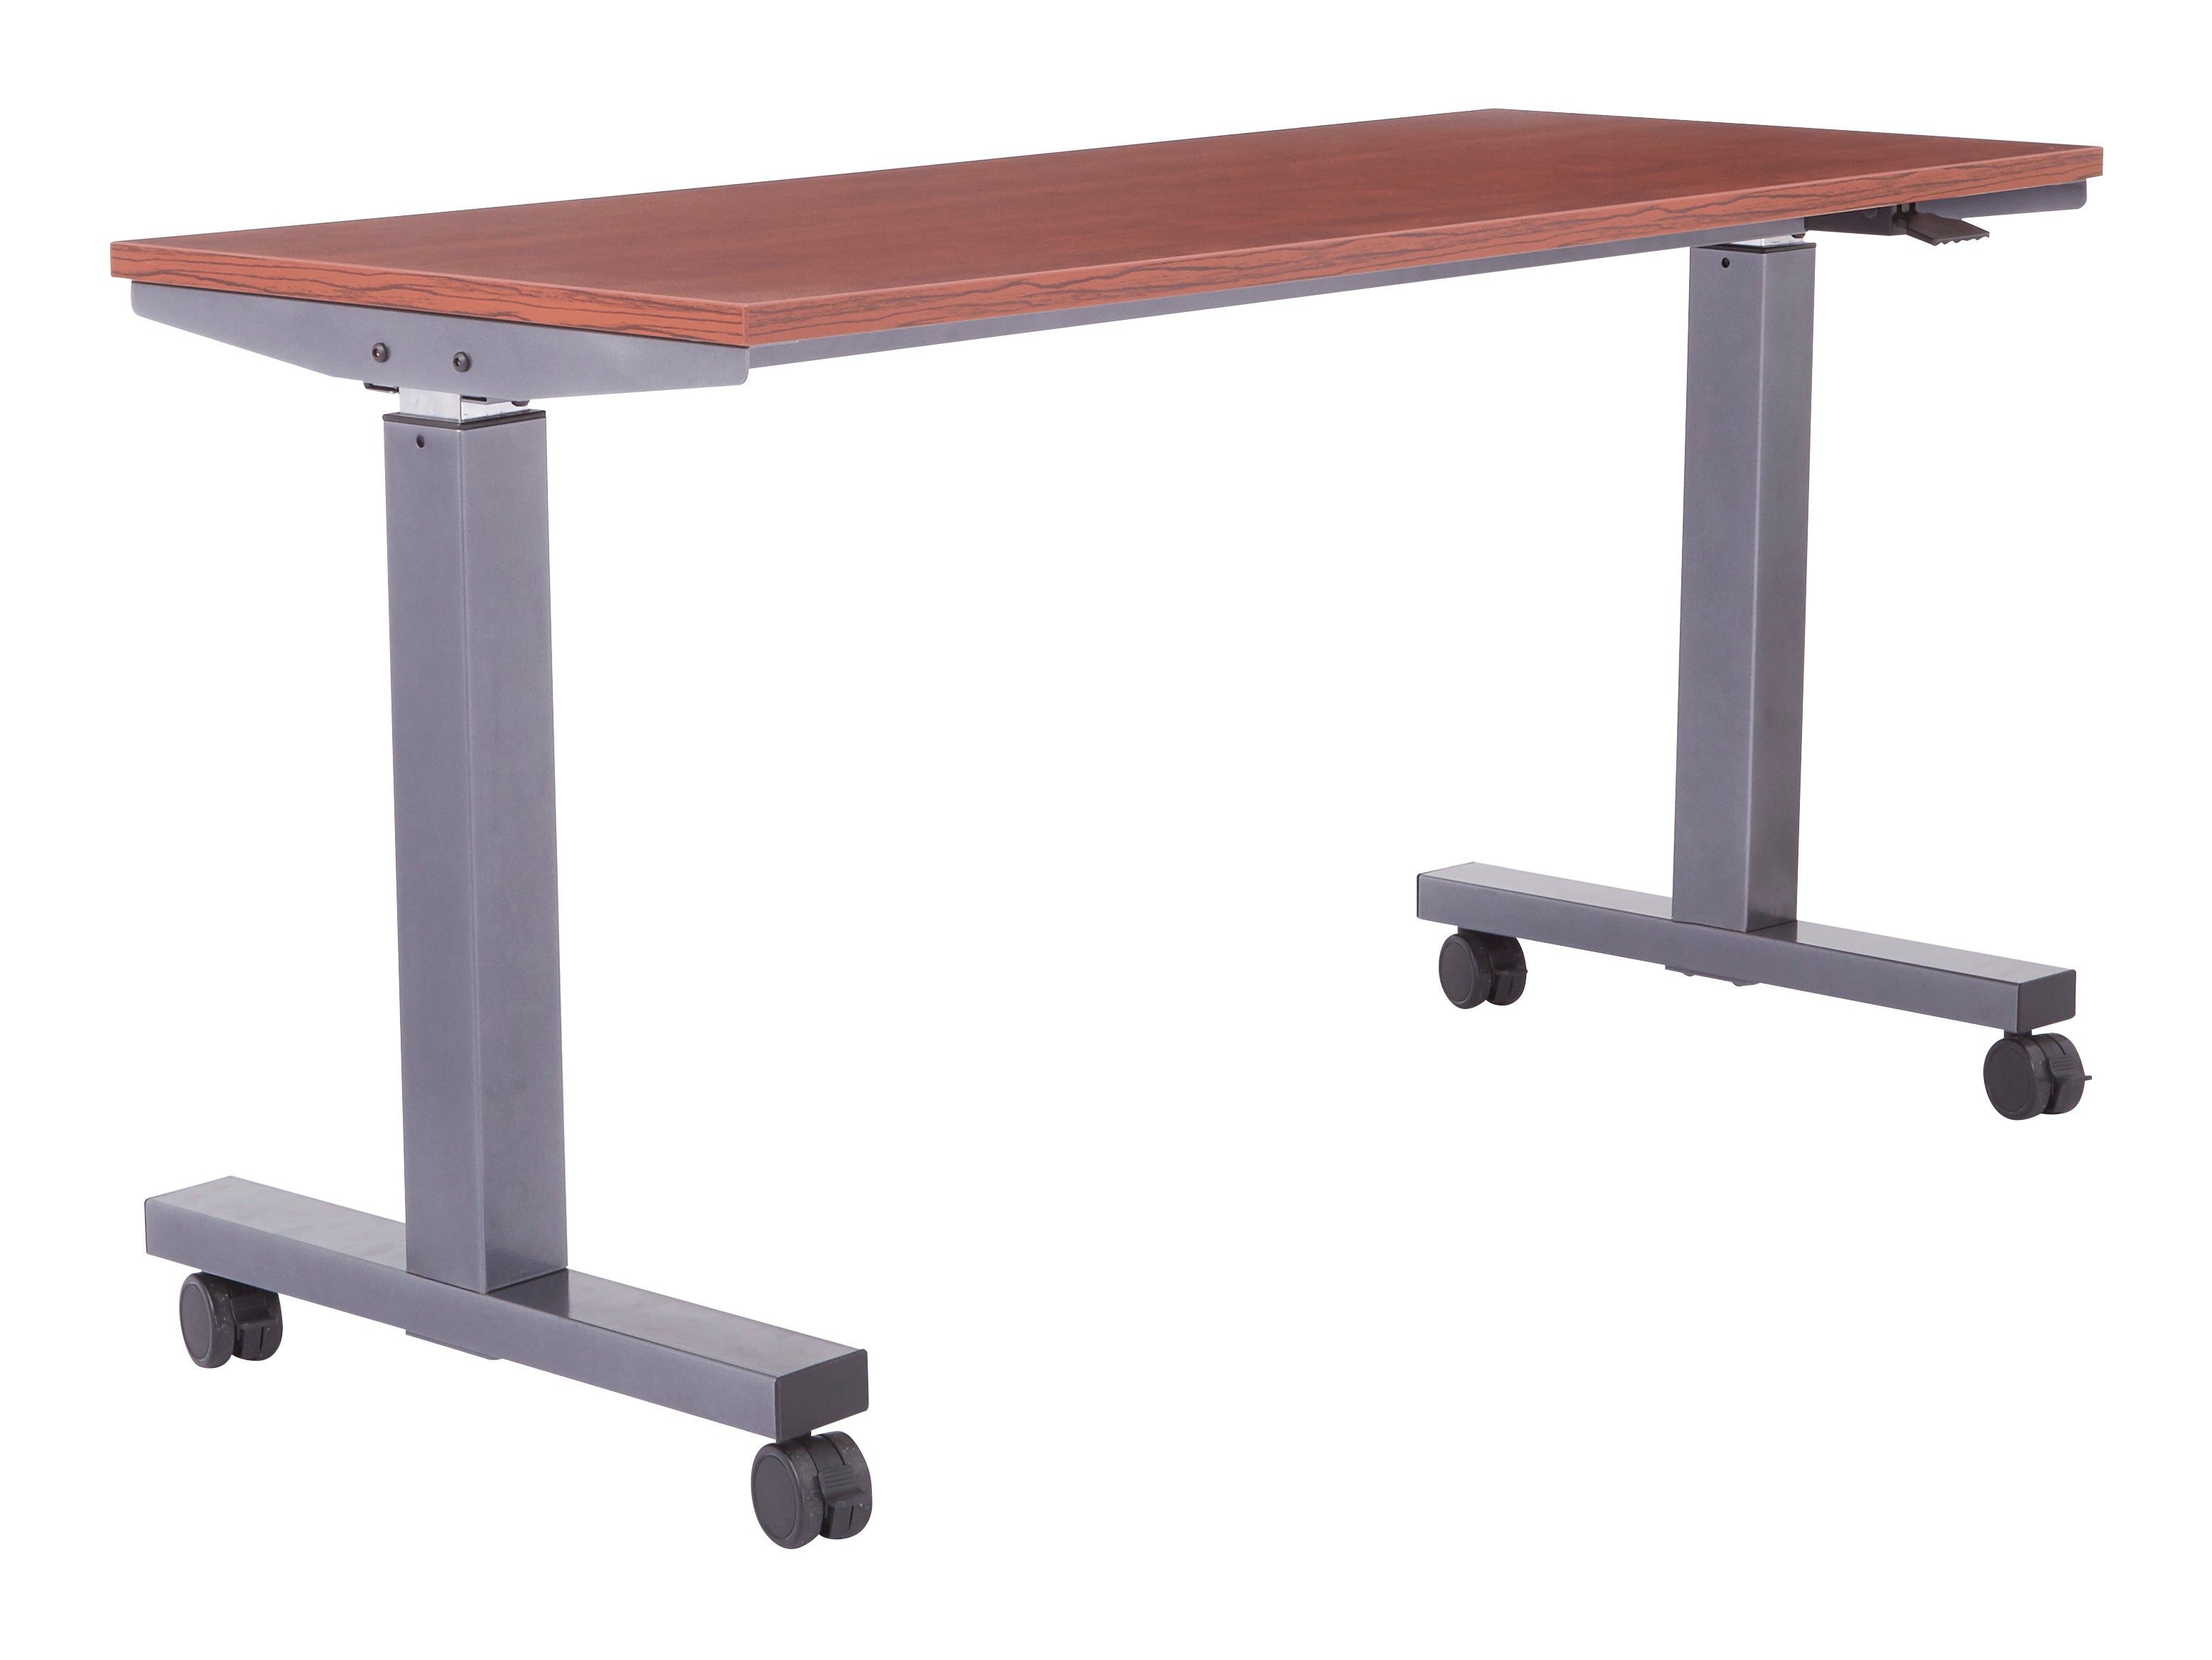 PHAT2460 - Mobile 60"W  Pneumatic Adjustable Height Desk by OSP